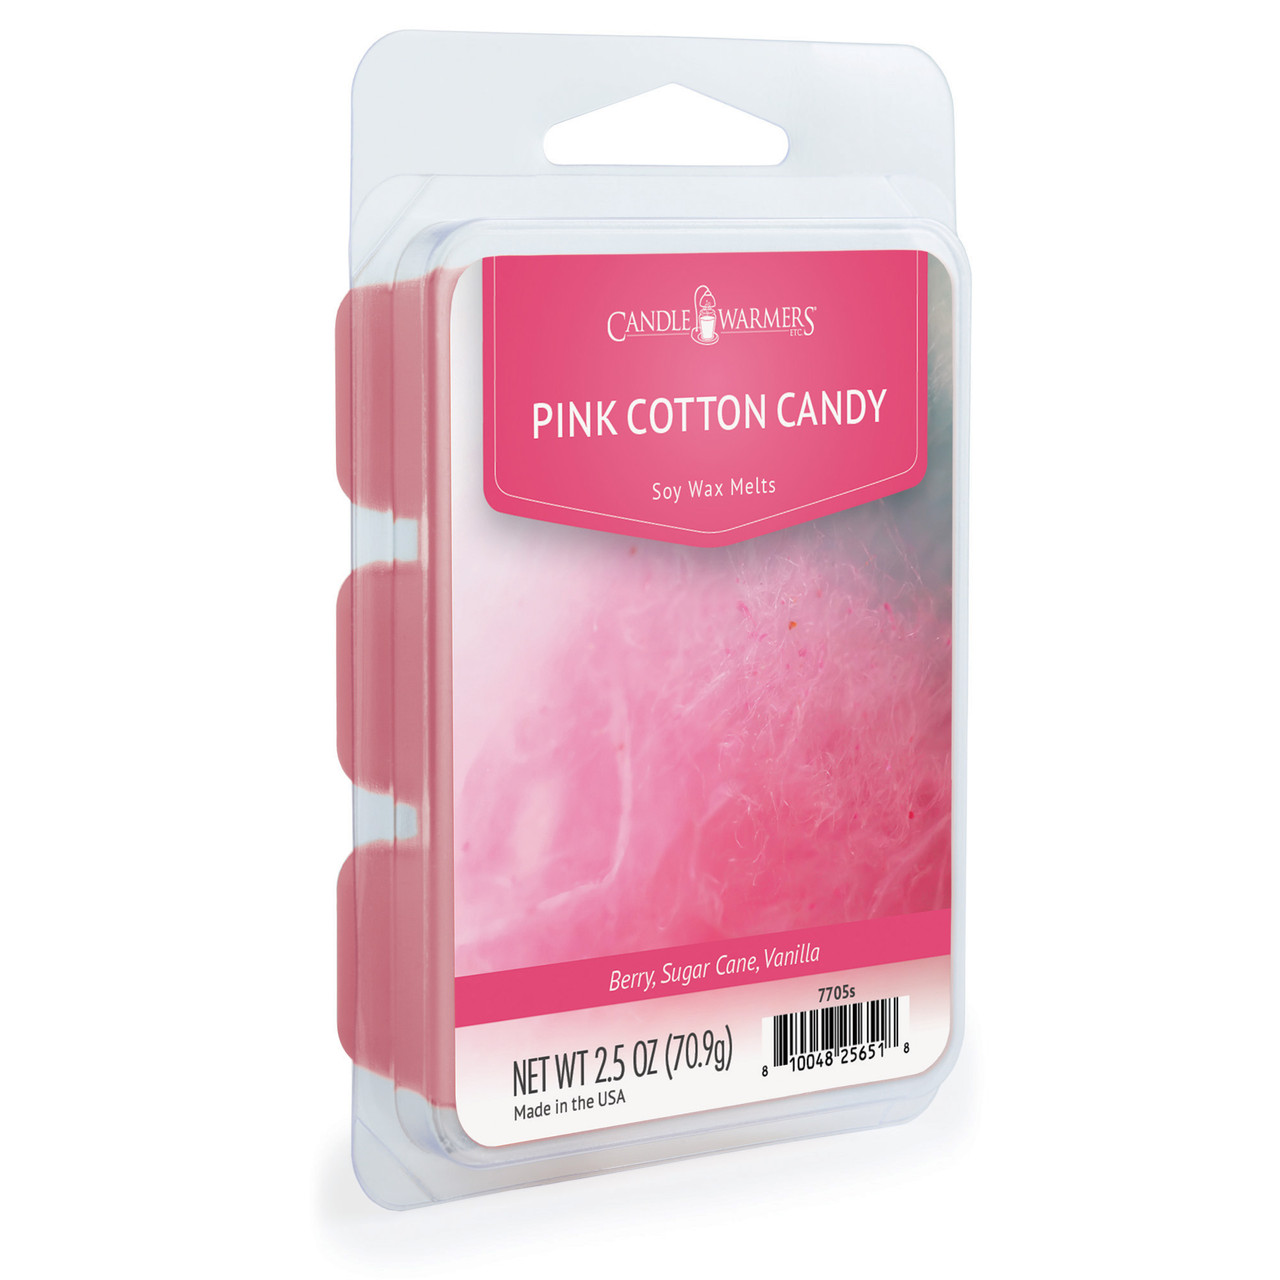 Candle Warmers Soy Wax Melts, Pink Cotton Candy - 2.5 oz